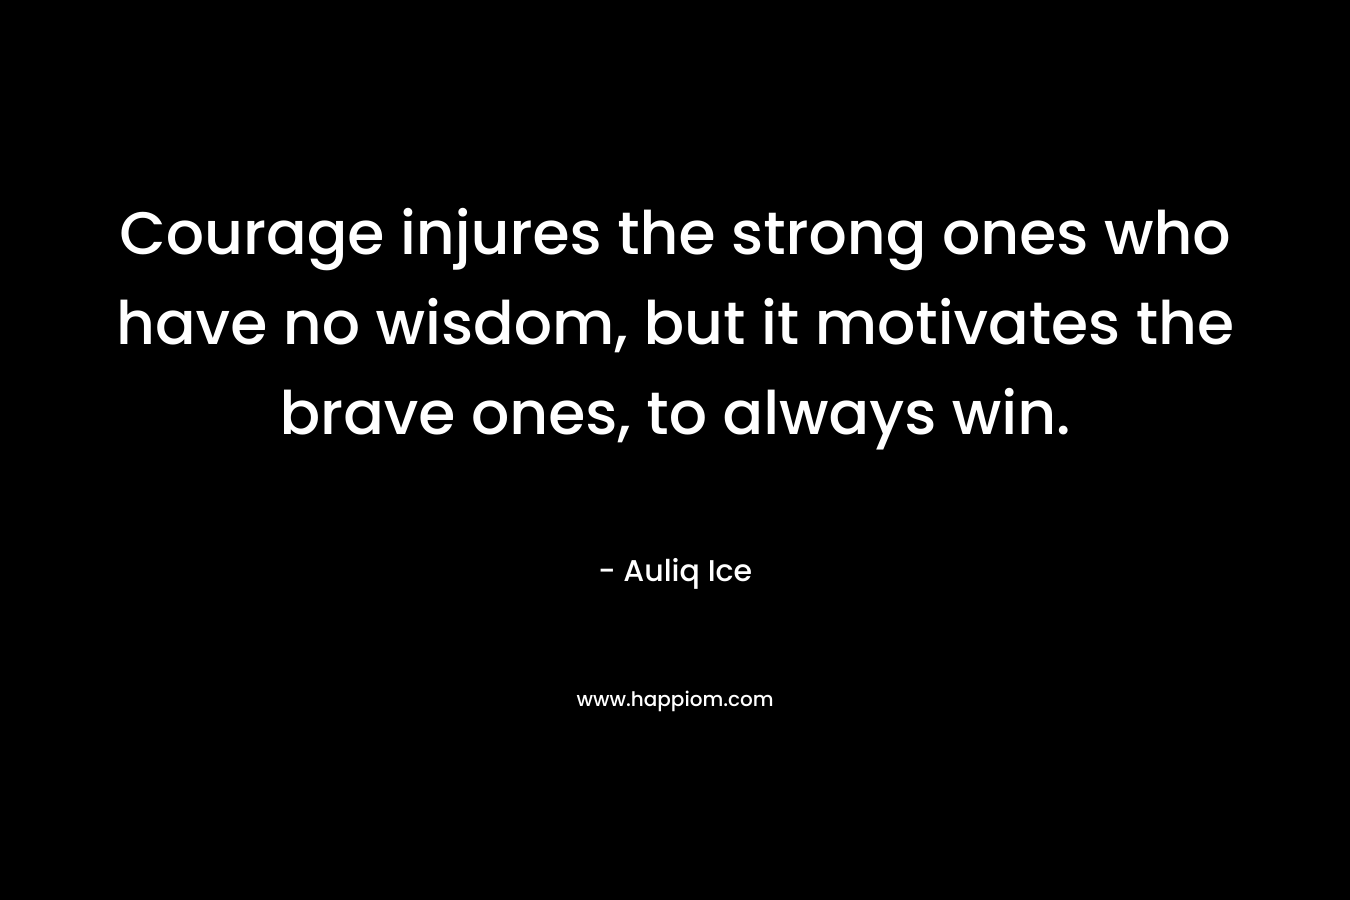 Courage injures the strong ones who have no wisdom, but it motivates the brave ones, to always win.